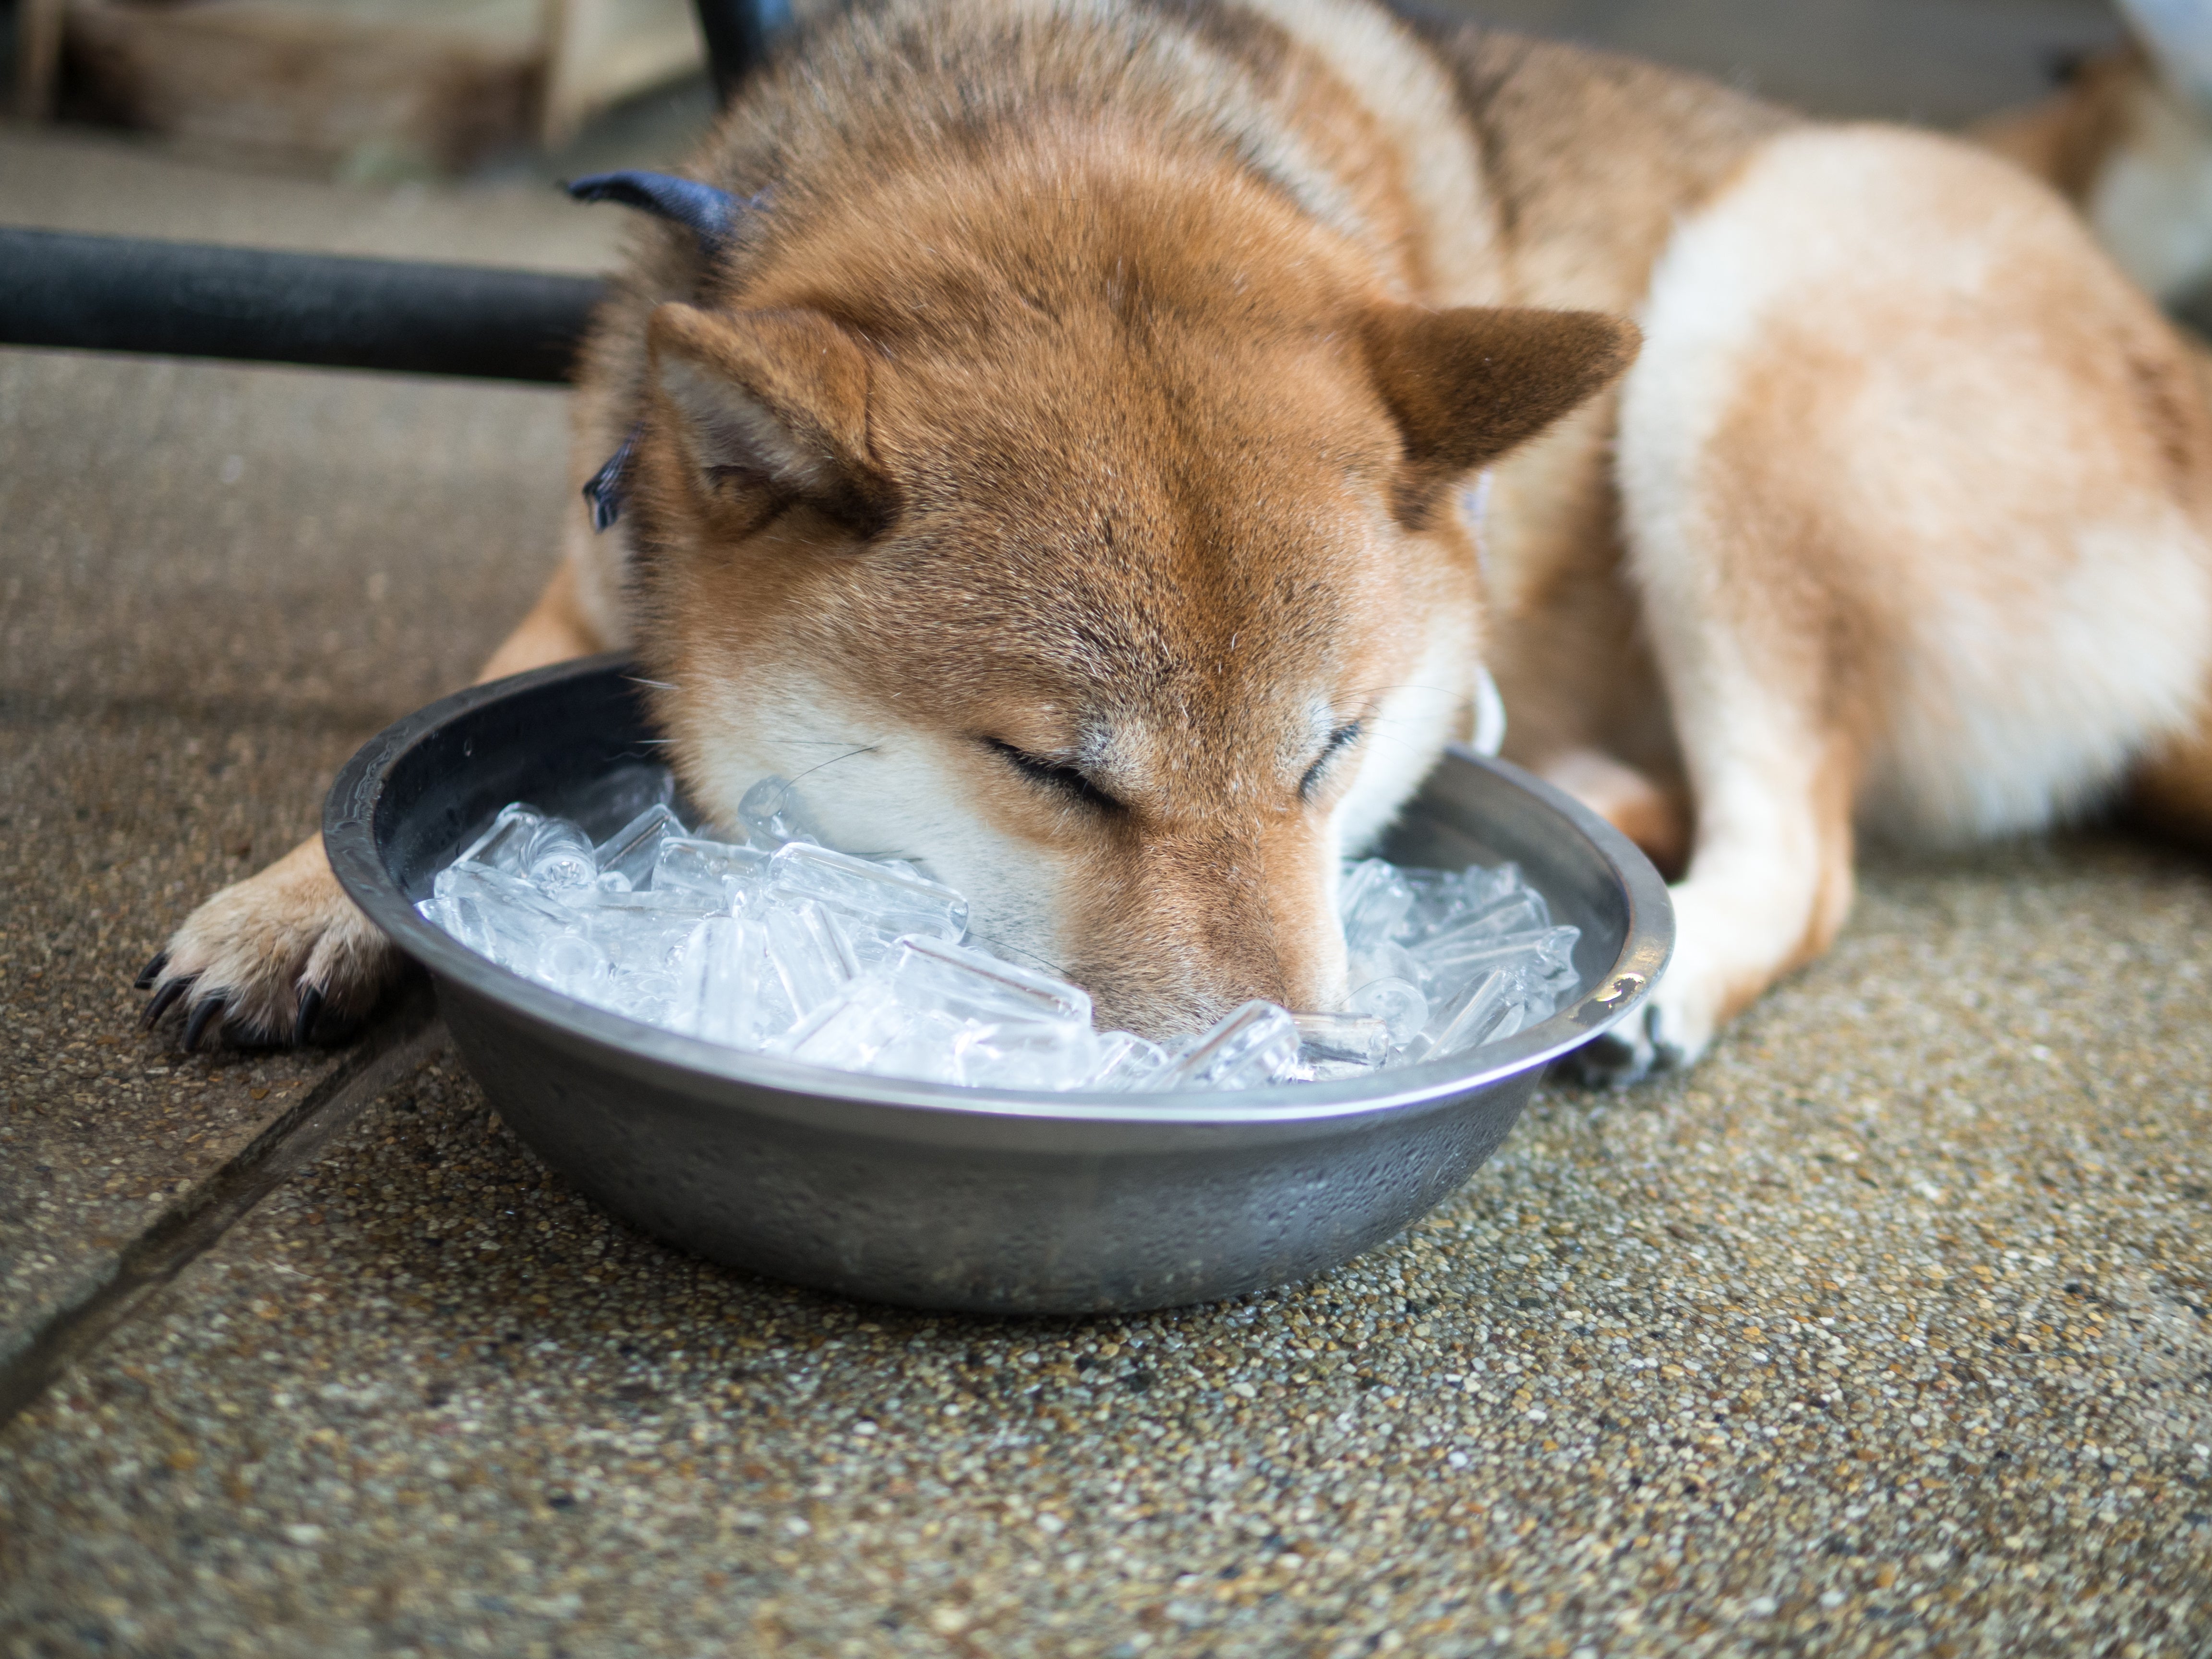 Ice cubes are not actually dog's best friend